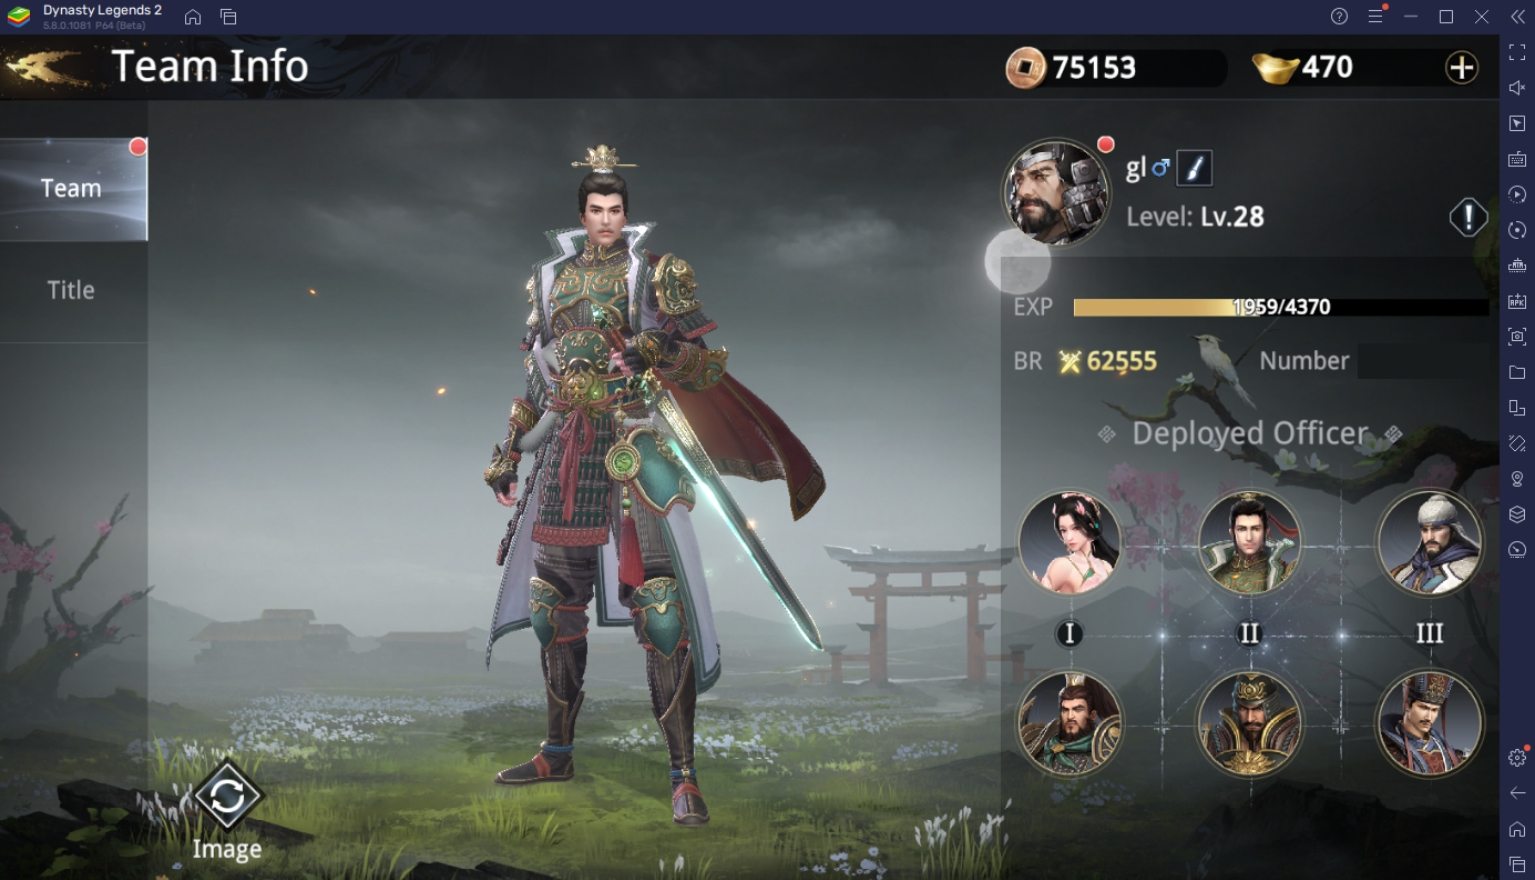 BlueStacks' Beginners Guide to Playing Dynasty Legends 2